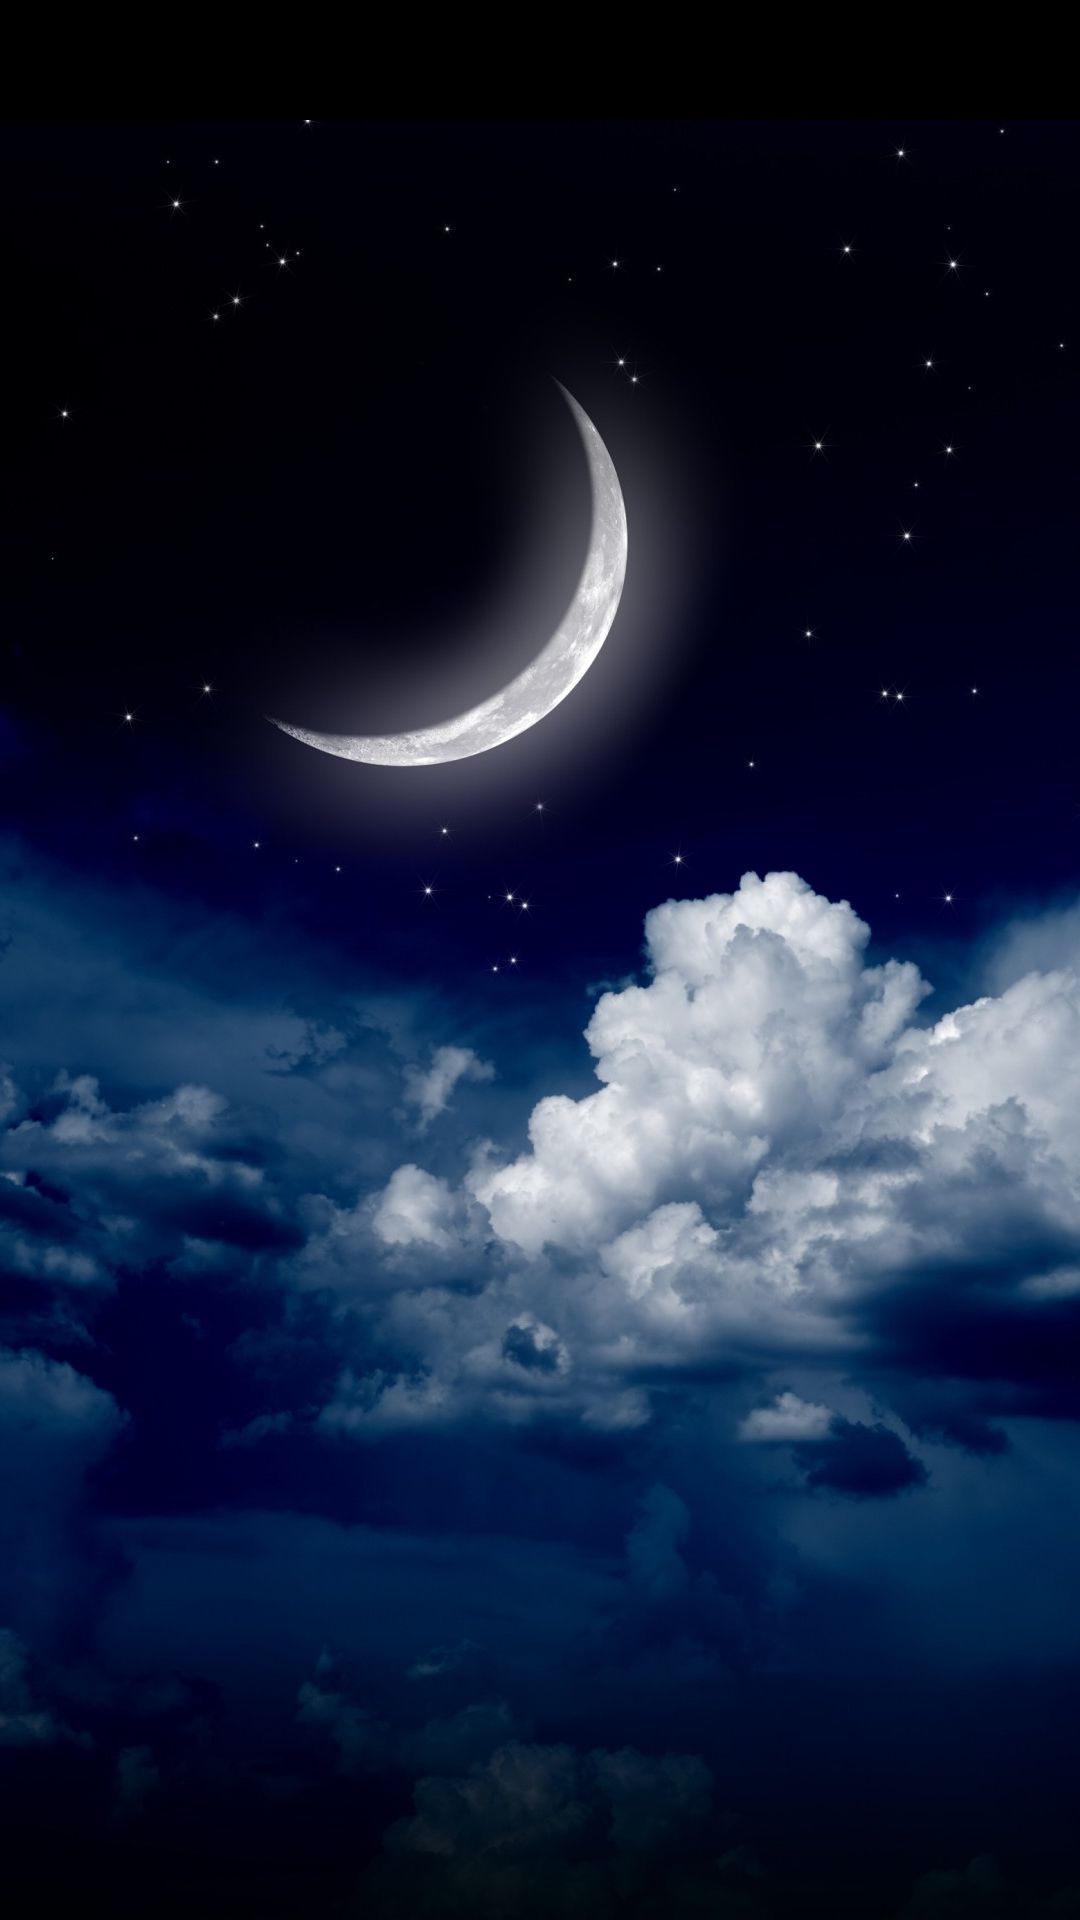 Gallery Moon Over The Clouds Mobile Hd Wallpaper. Night Sky Wallpaper, Galaxy Wallpaper, Sky Wallpaper